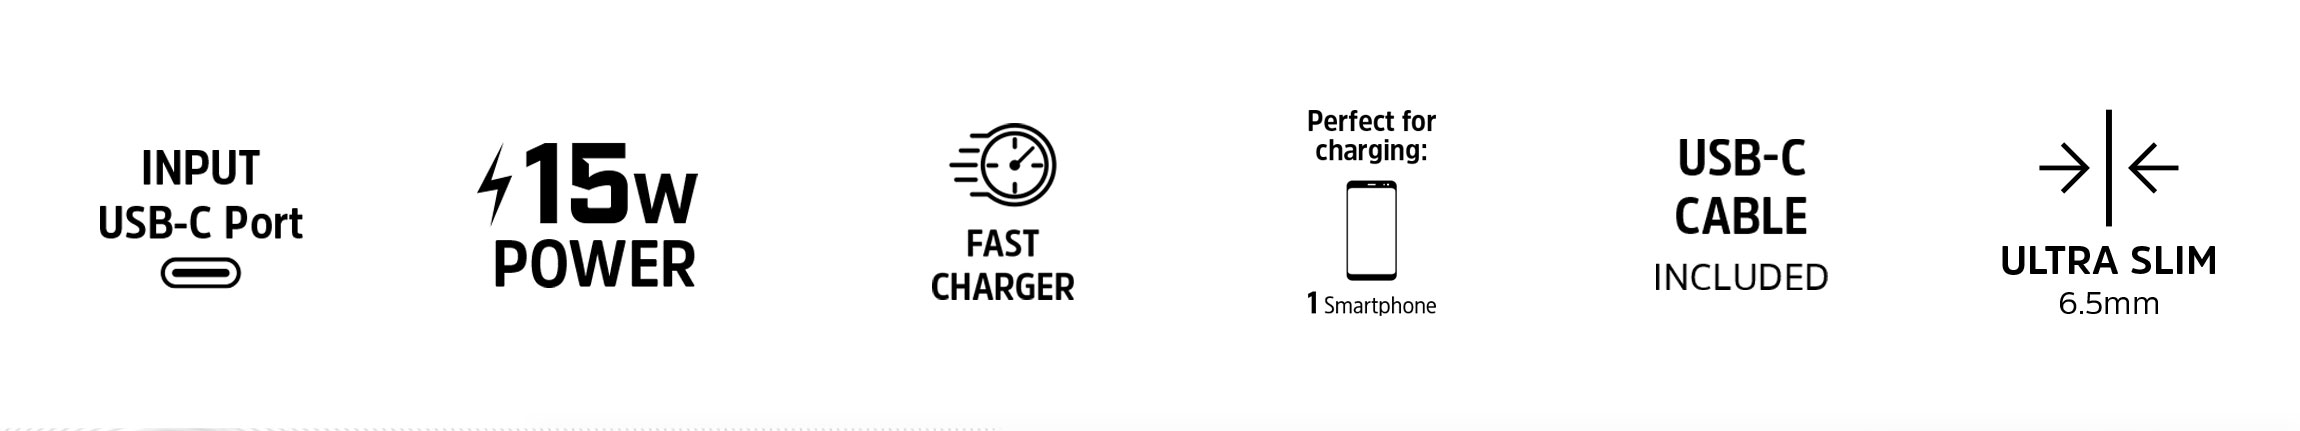 Wireless-charger-A15W-picto.jpg